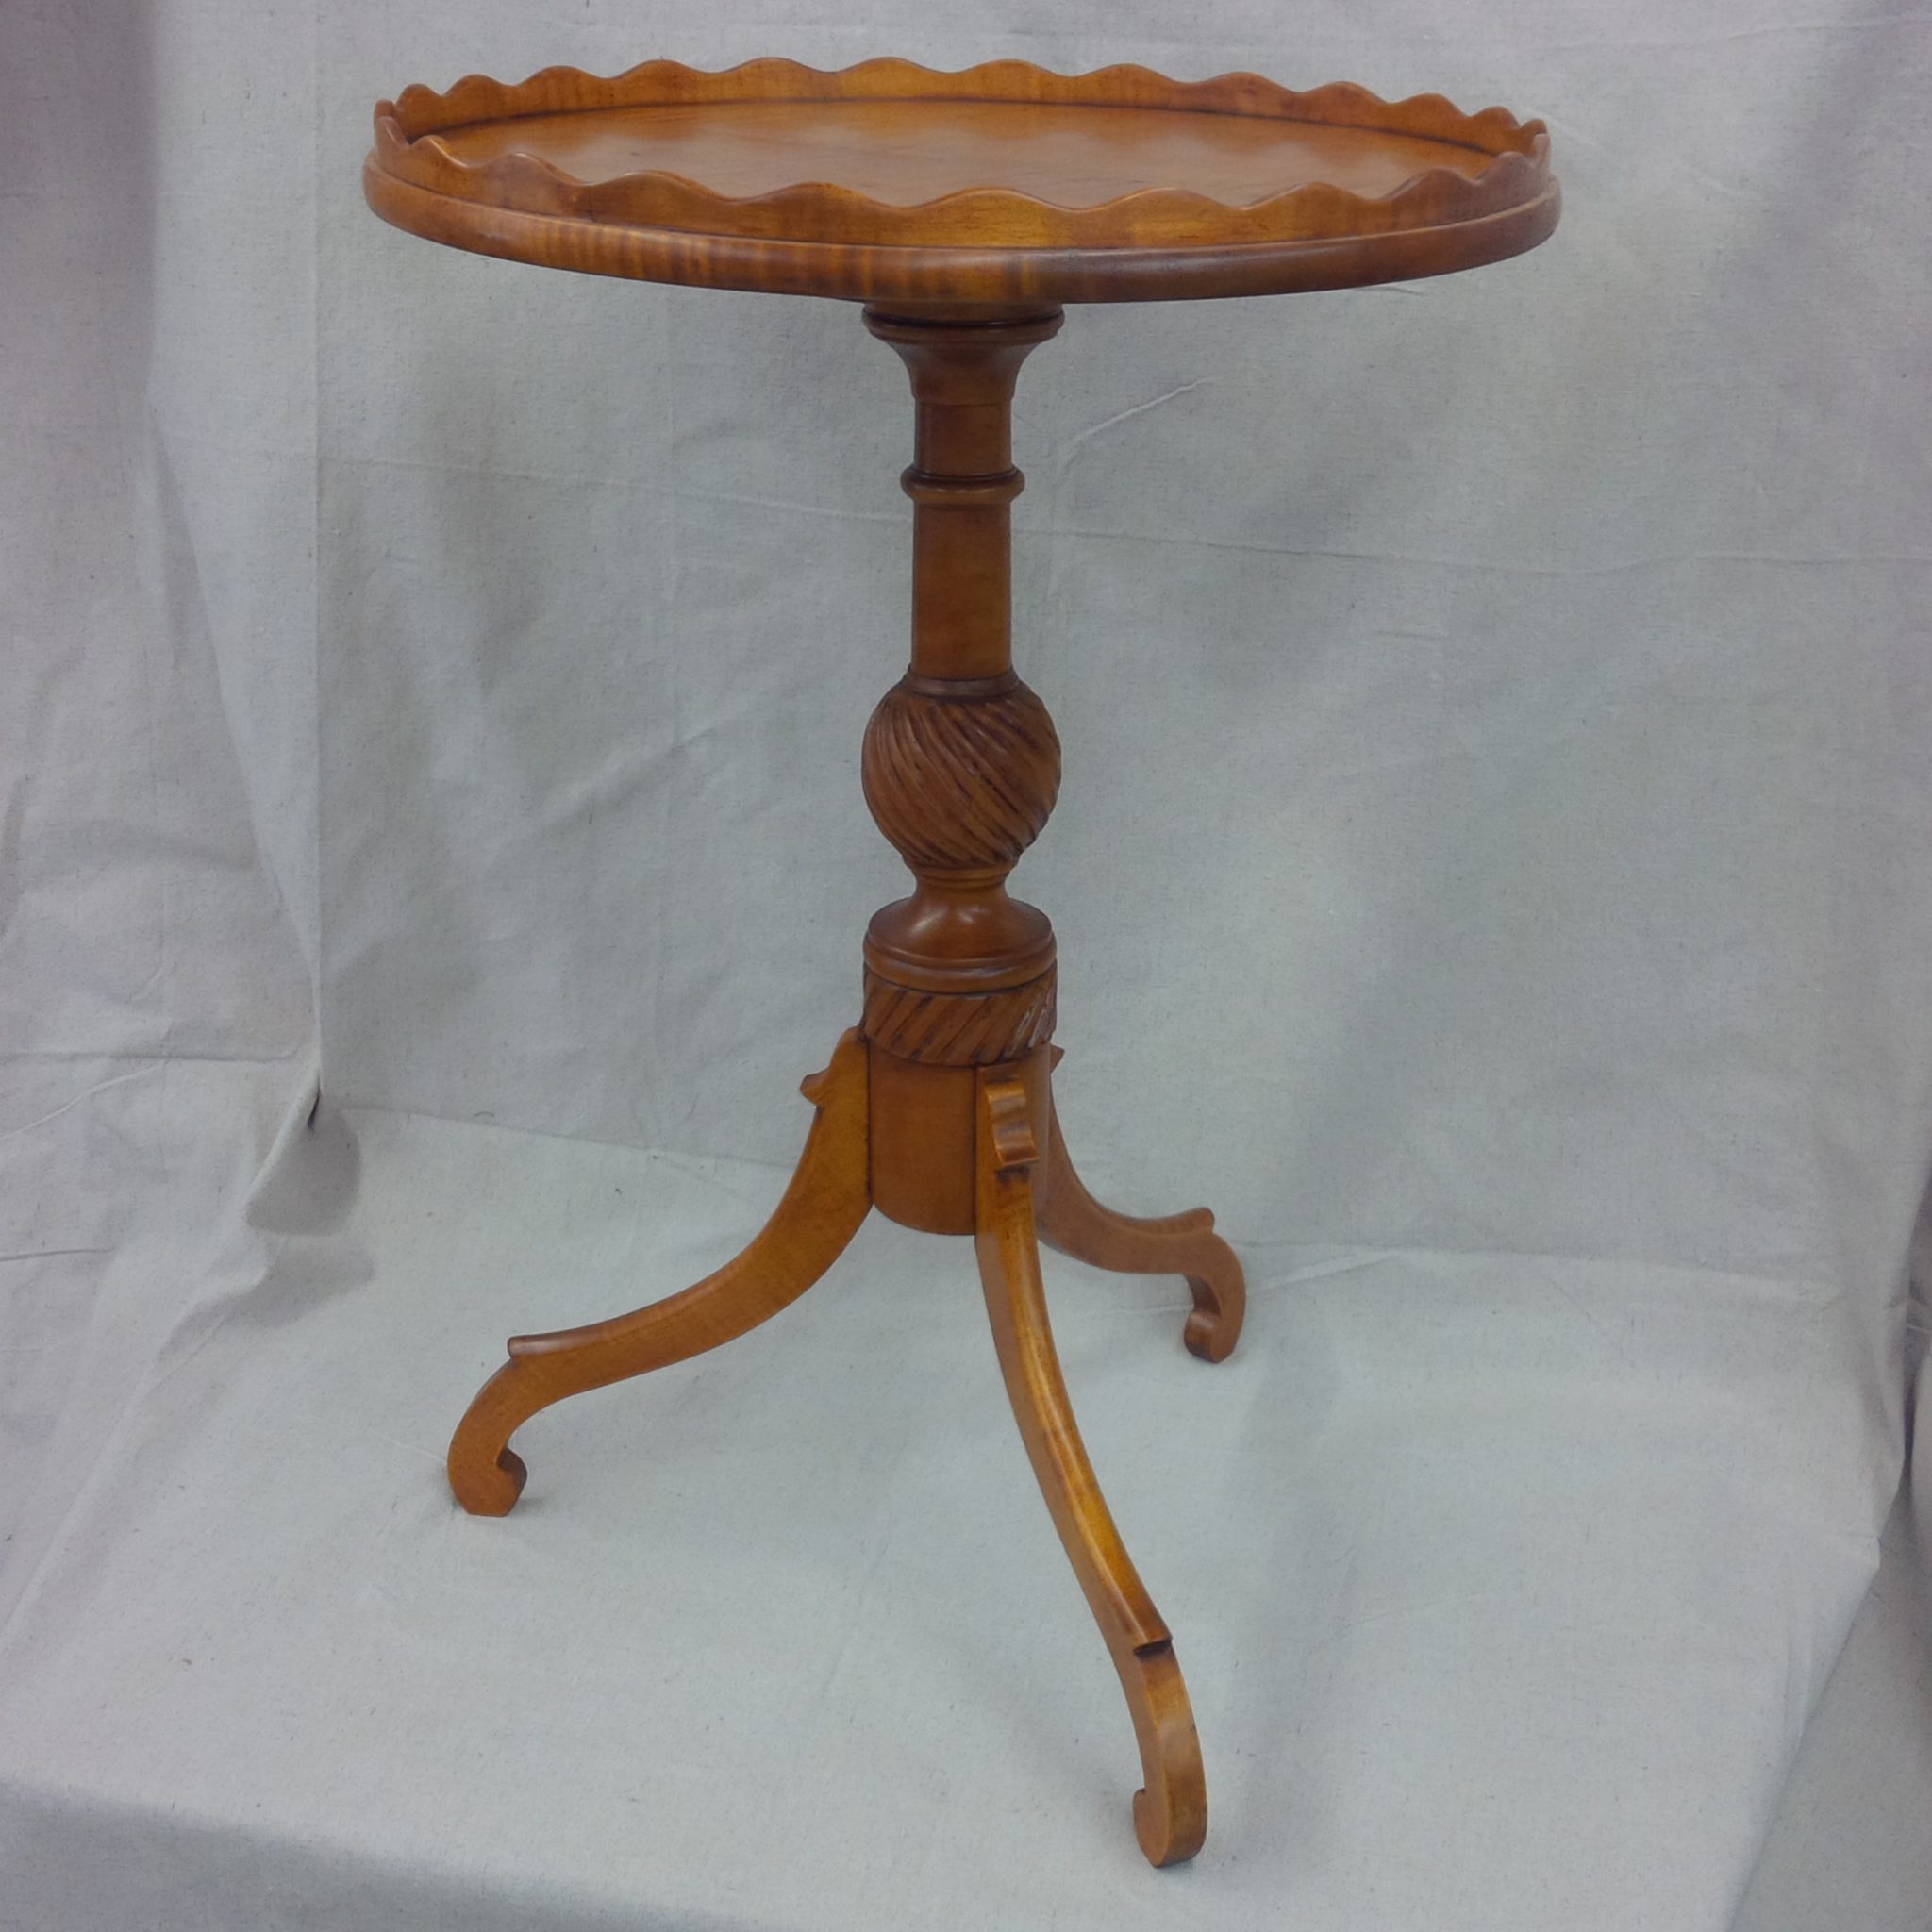 Period pie crust table in curly maple with fine tooling